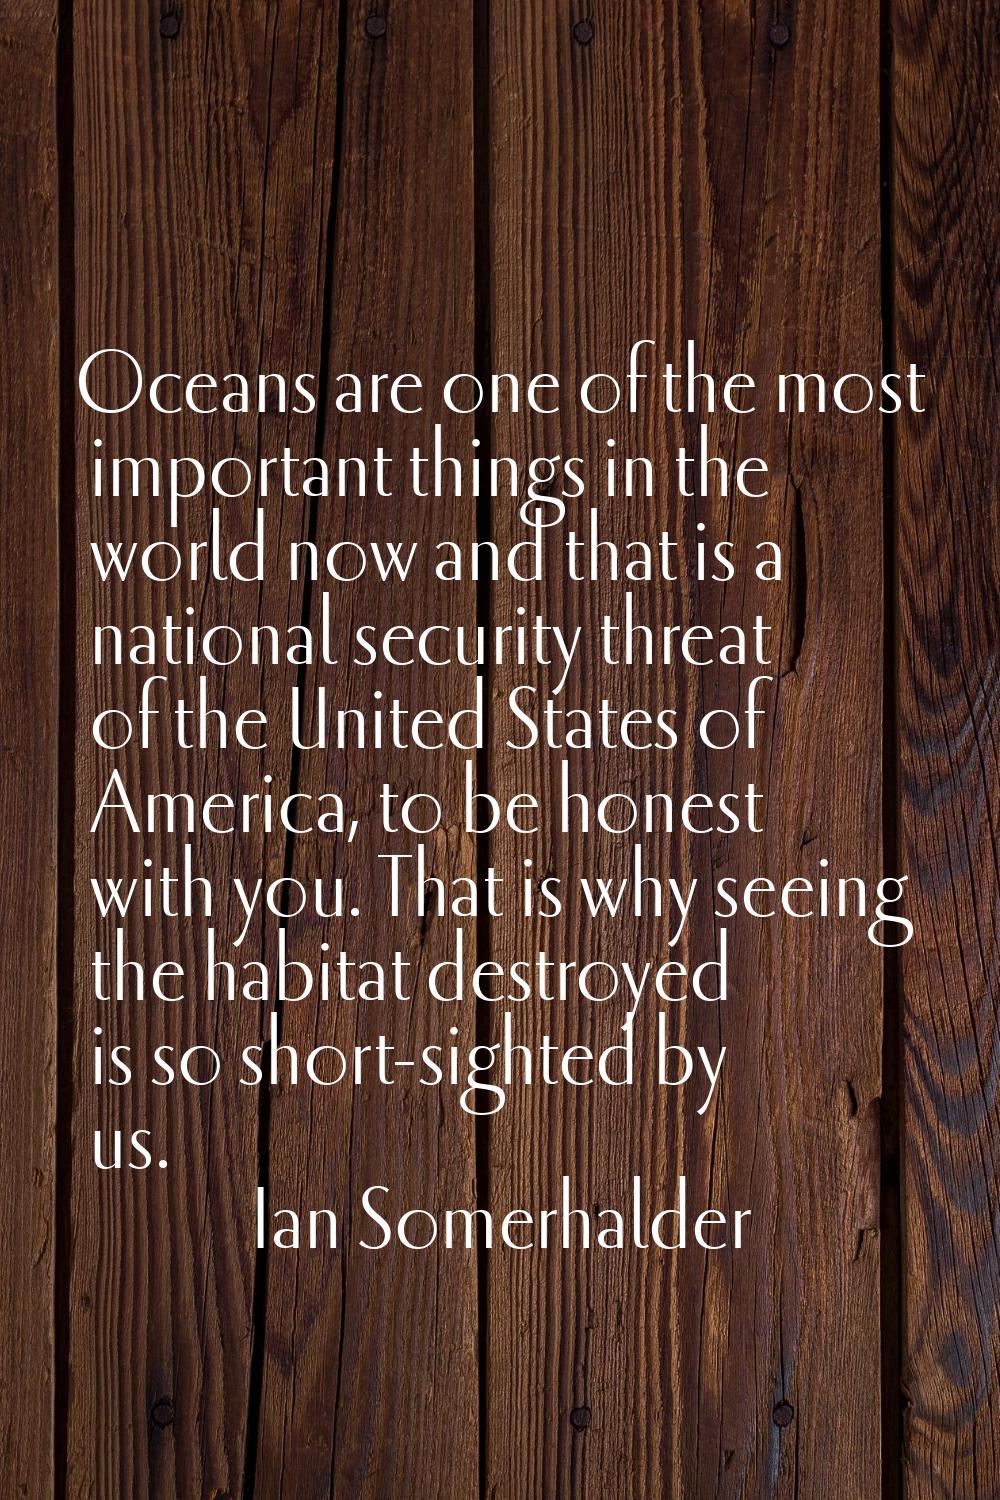 Oceans are one of the most important things in the world now and that is a national security threat